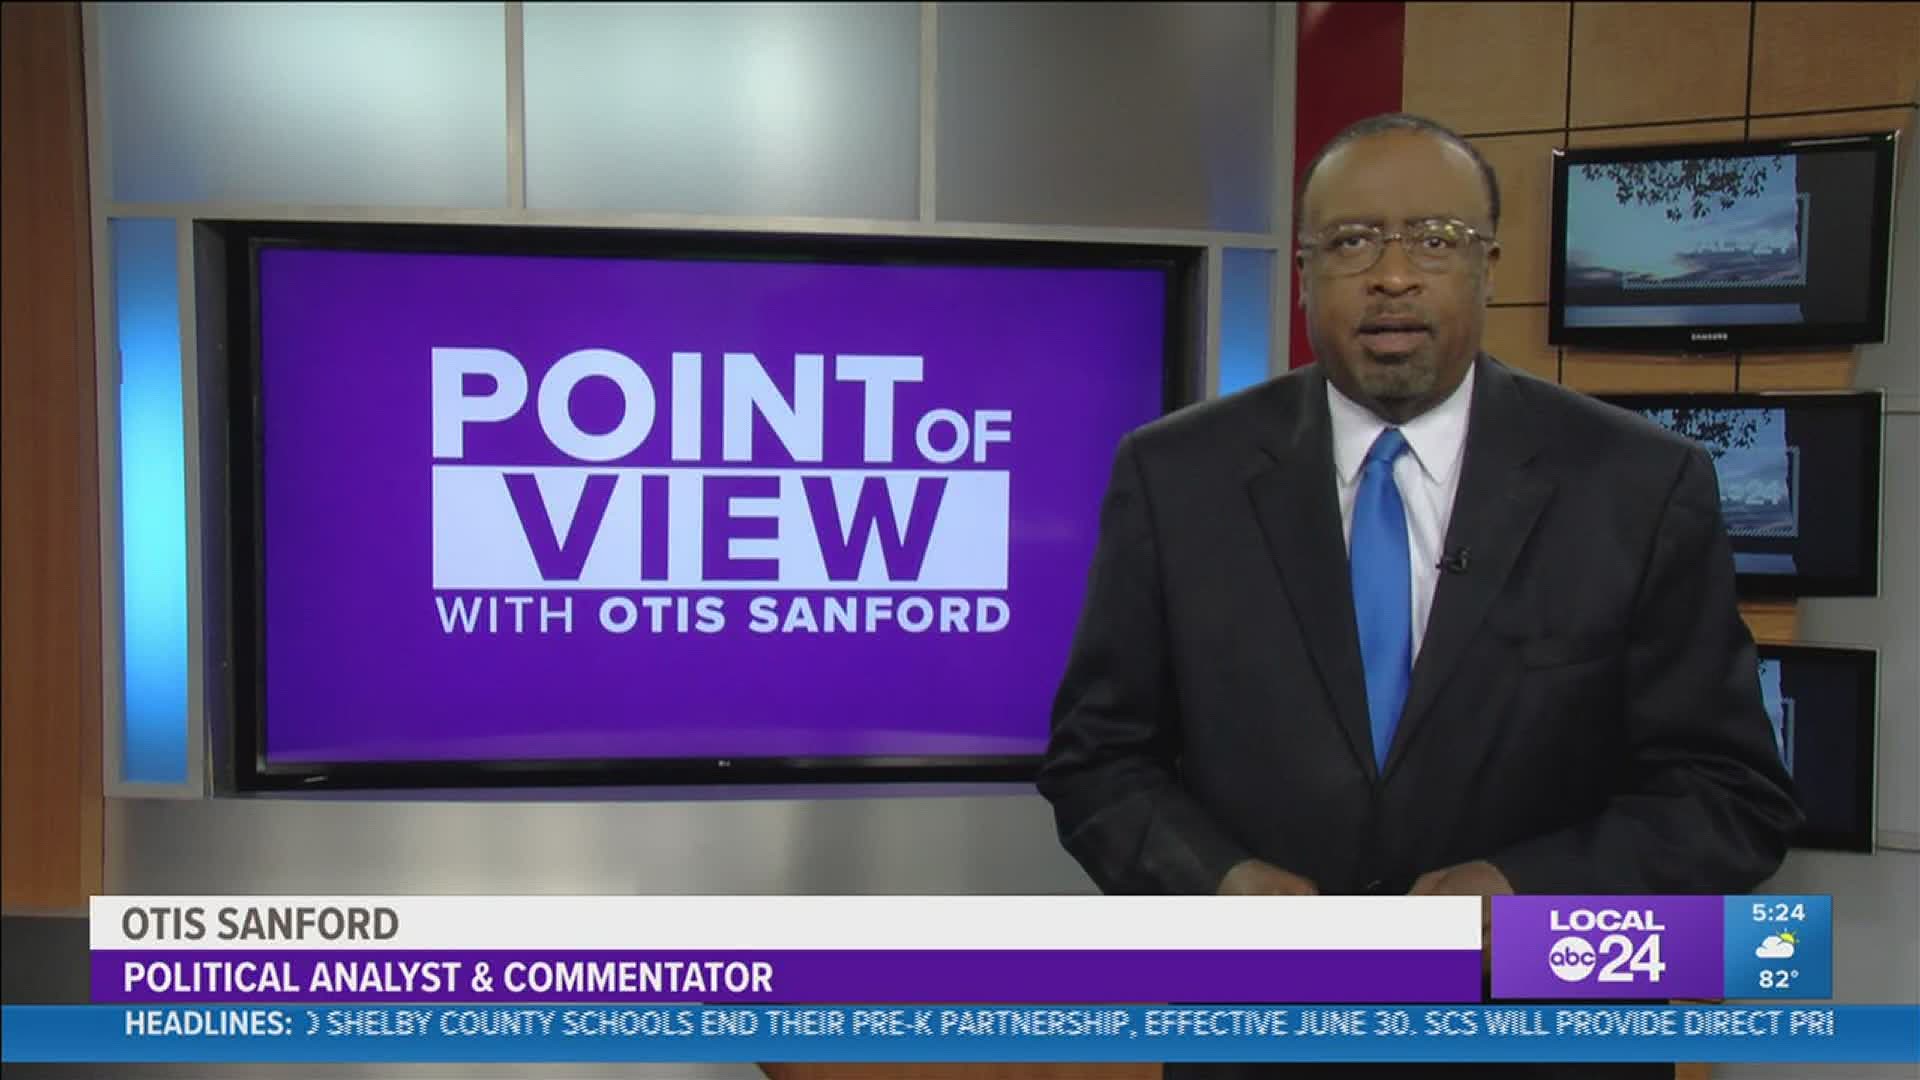 Local 24 News political analyst and commentator Otis Sanford shares his point of view on a gas station debate going on in Binghampton.